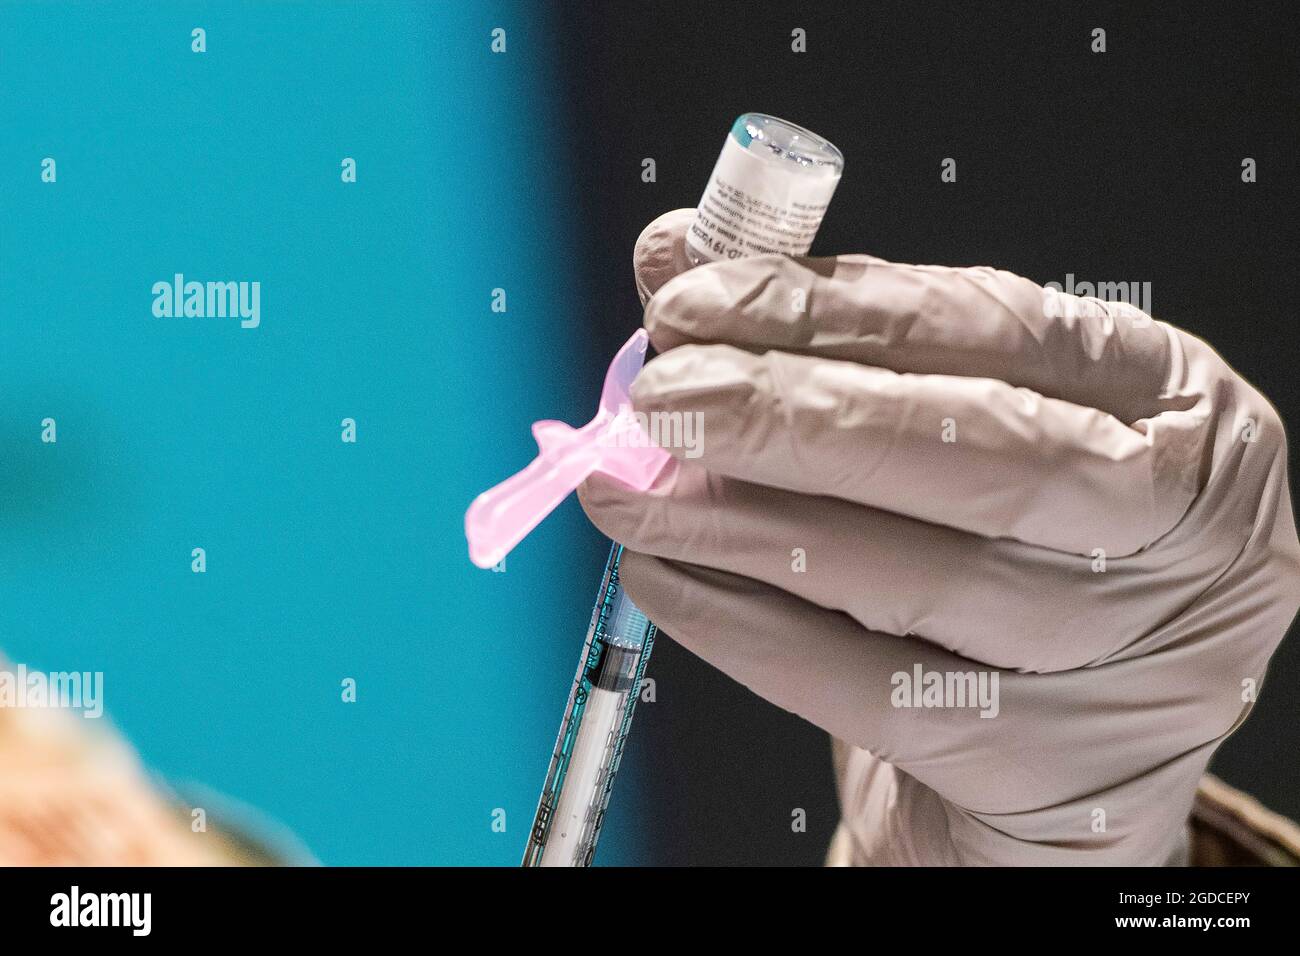 A technician loads a syringe with the COVID-19 vaccine to be delivered to waiting personnel inside the Medical Center at Wright-Patterson Air Force Base, Ohio, Jan. 5, 2021. Wright-Patt is currently in phase one of the Department of Defense’s three-phased approach to prioritize health care providers, support staff, emergency services and public safety personnel. (U.S. Air Force photo by Wesley Farnsworth) Stock Photo